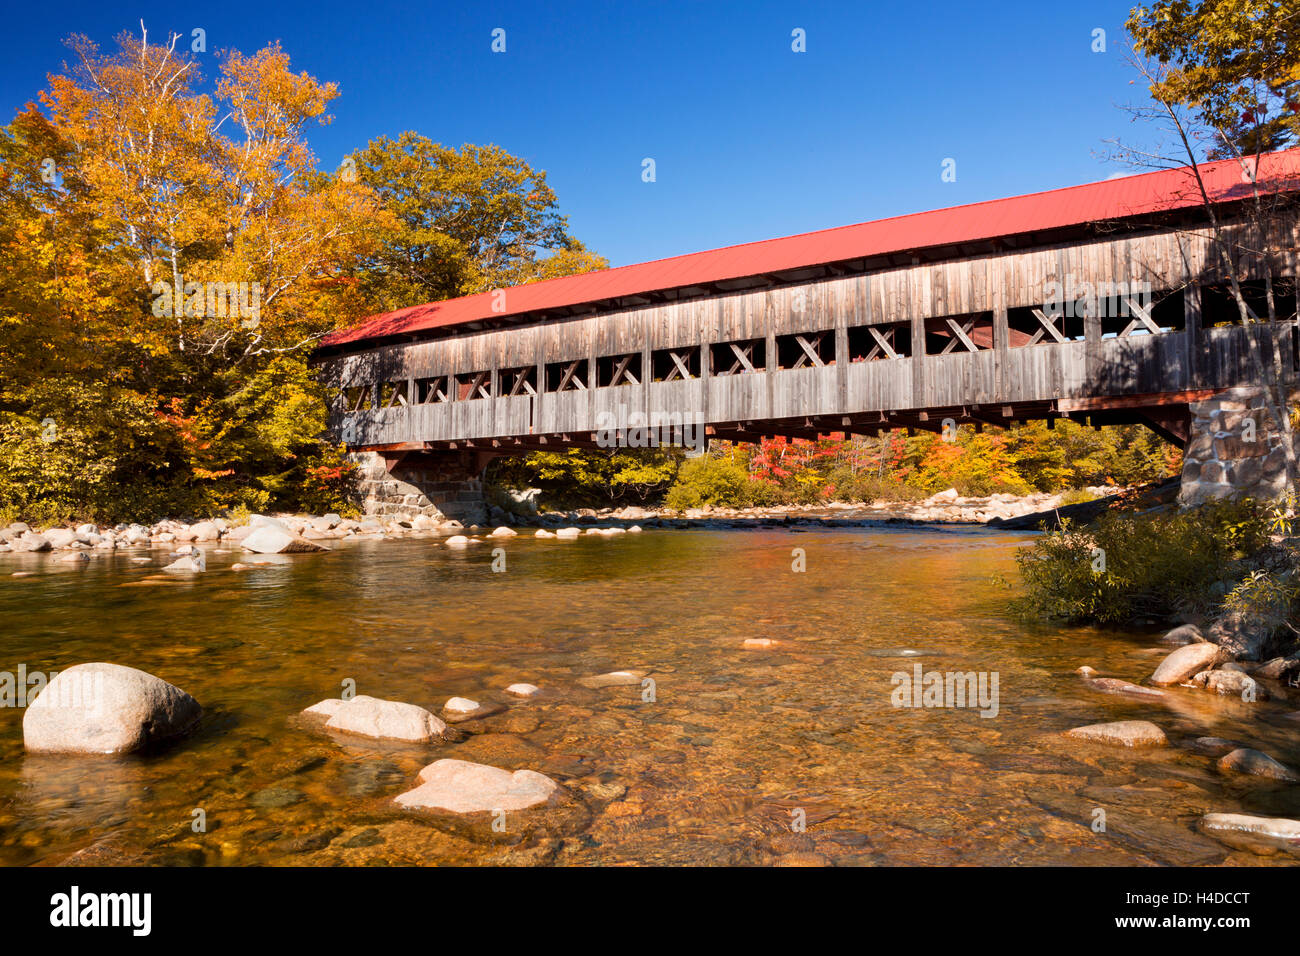 The Albany Covered Bridge over the Swift River in the White Mountain National Forest in New Hampshire, USA. Stock Photo